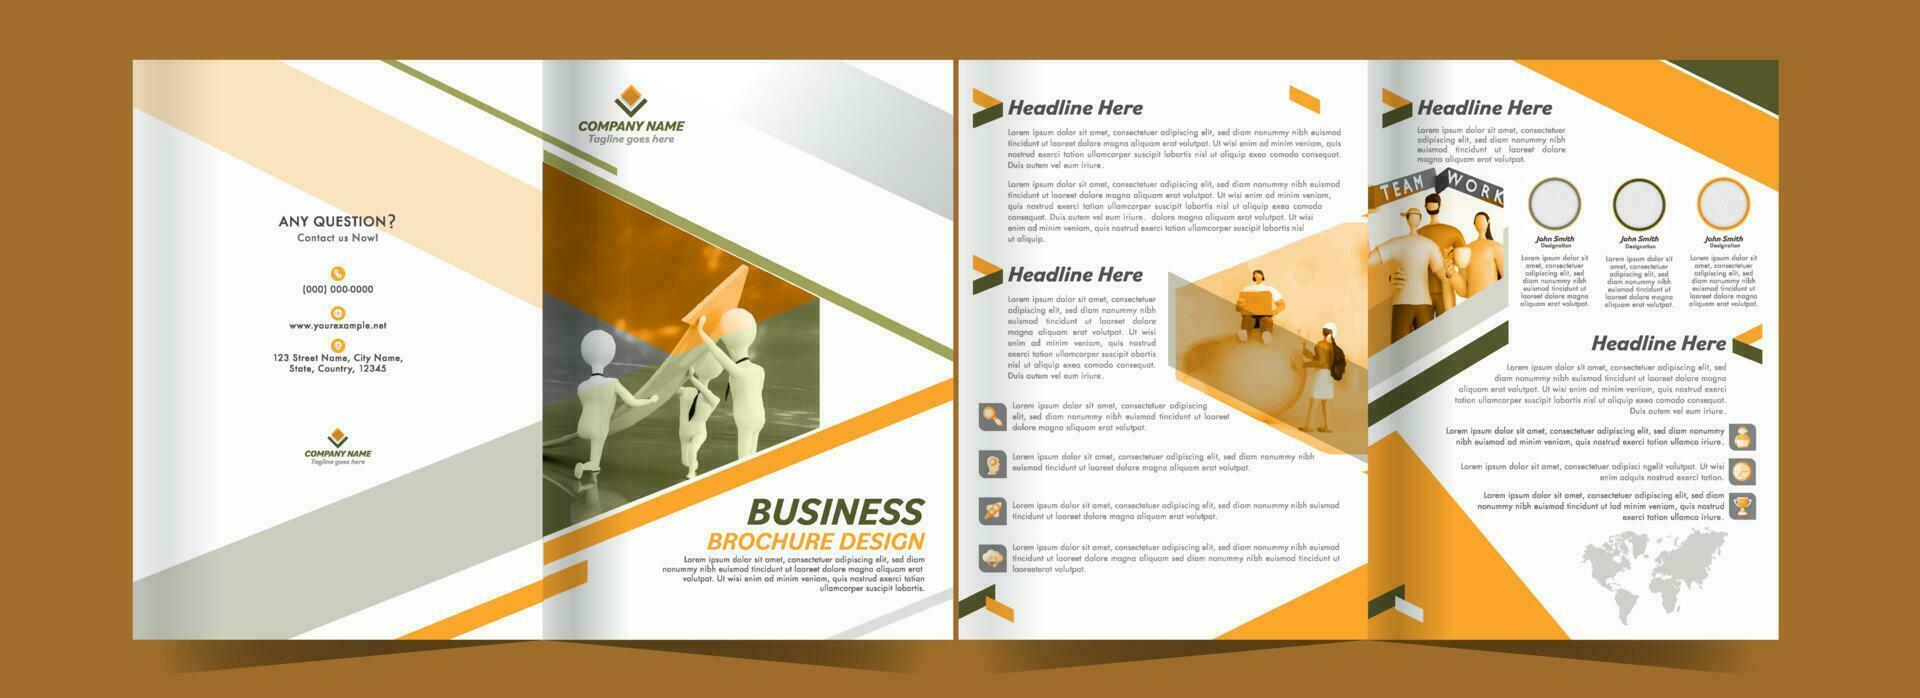 Bi-Fold Business Brochure Template, Annual Report Layout In Front And Back View. vector